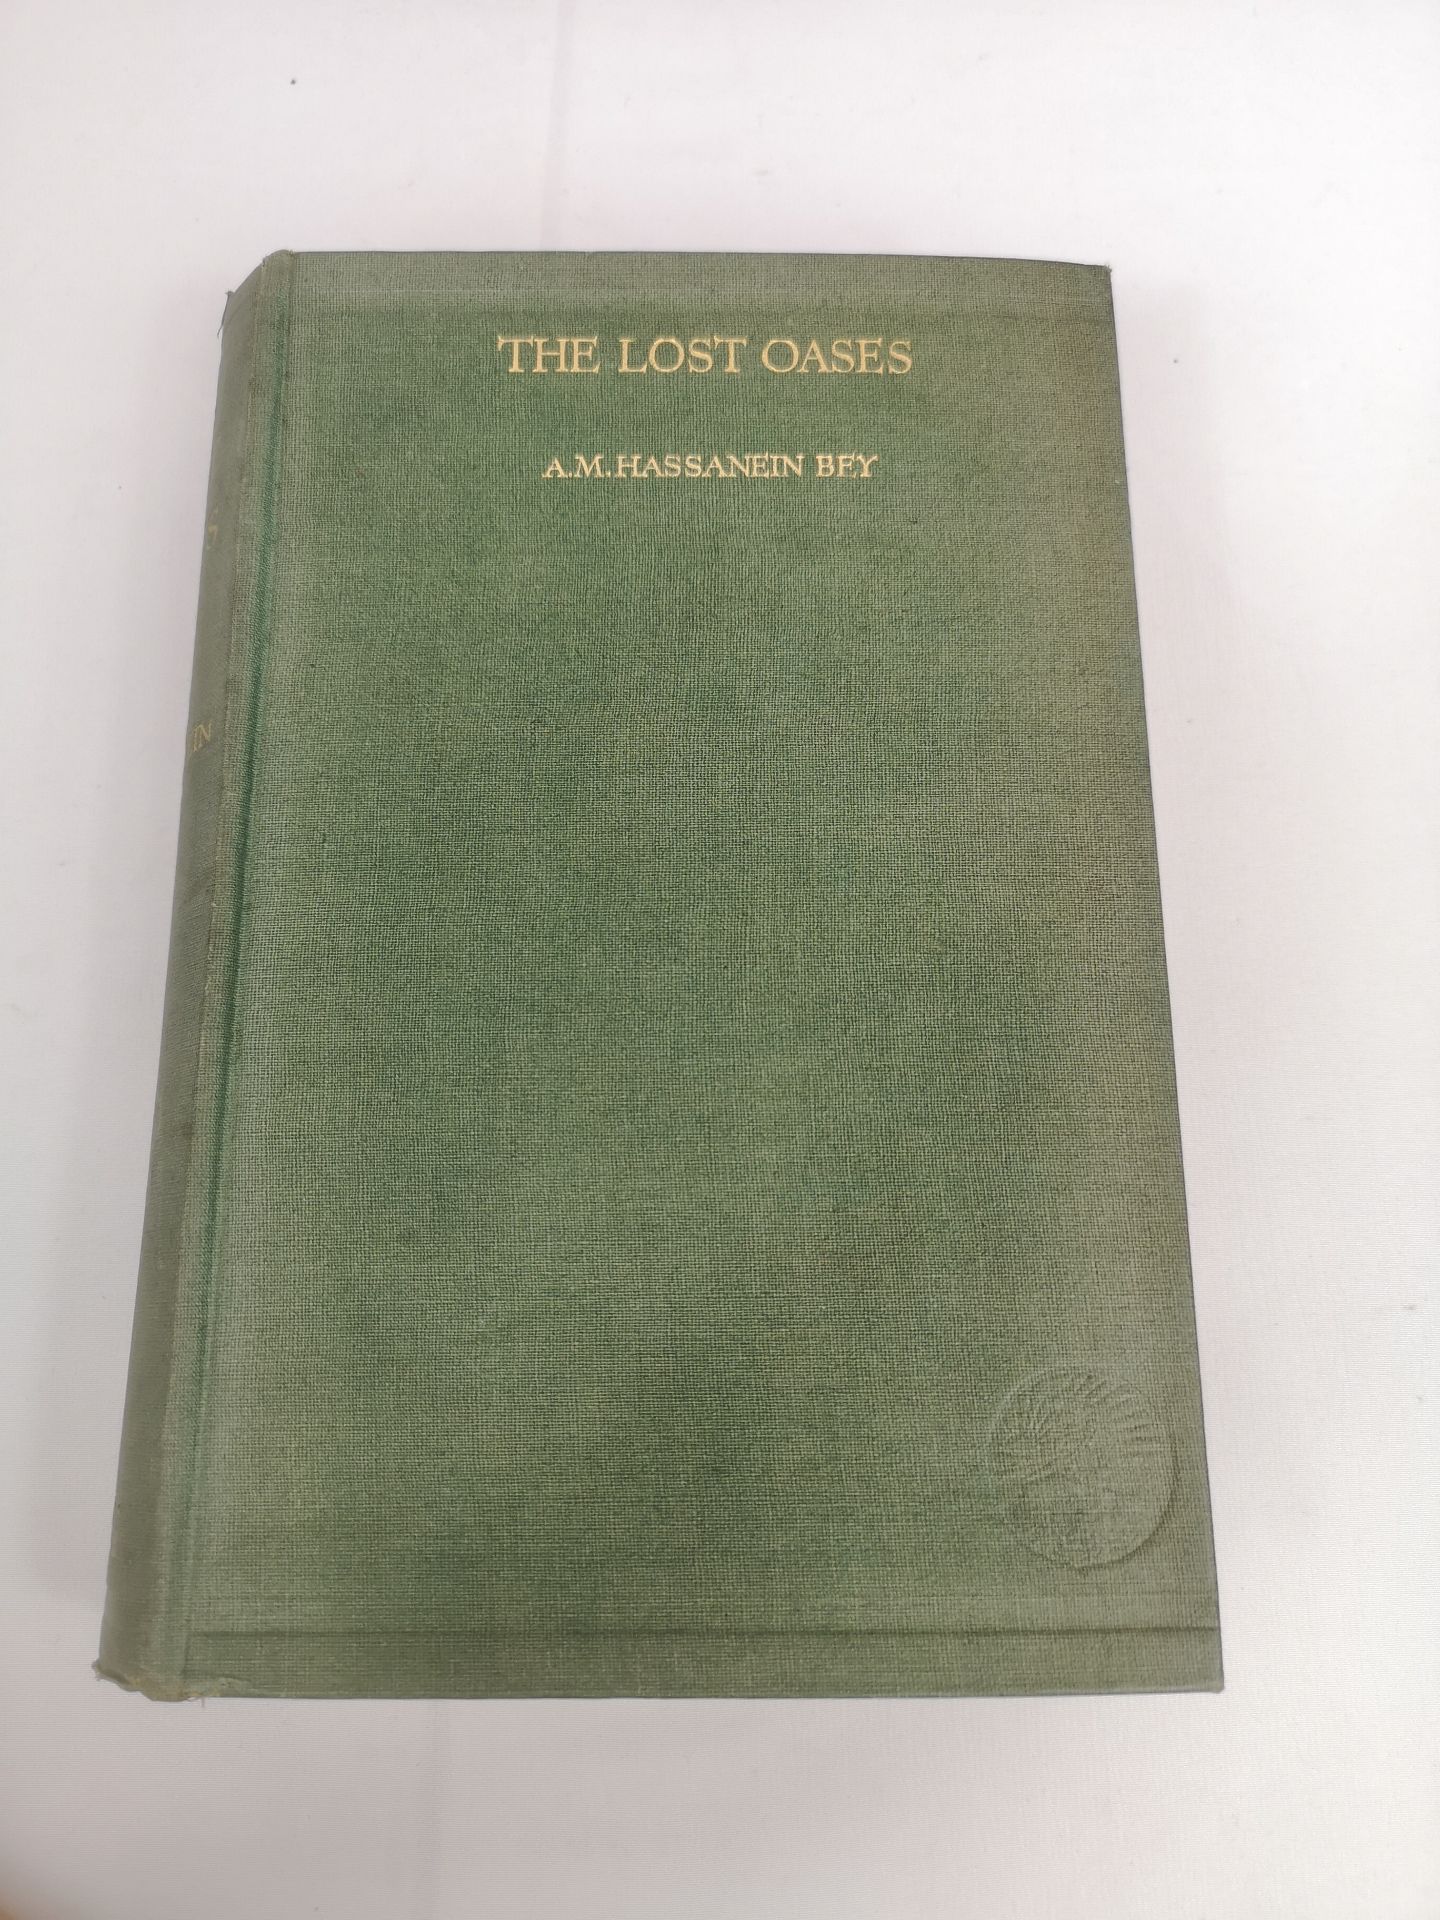 The Lost Oases by A.M.Hassanein Bey; together with Revolt in the Desert by T.E. Lawrence - Image 2 of 8